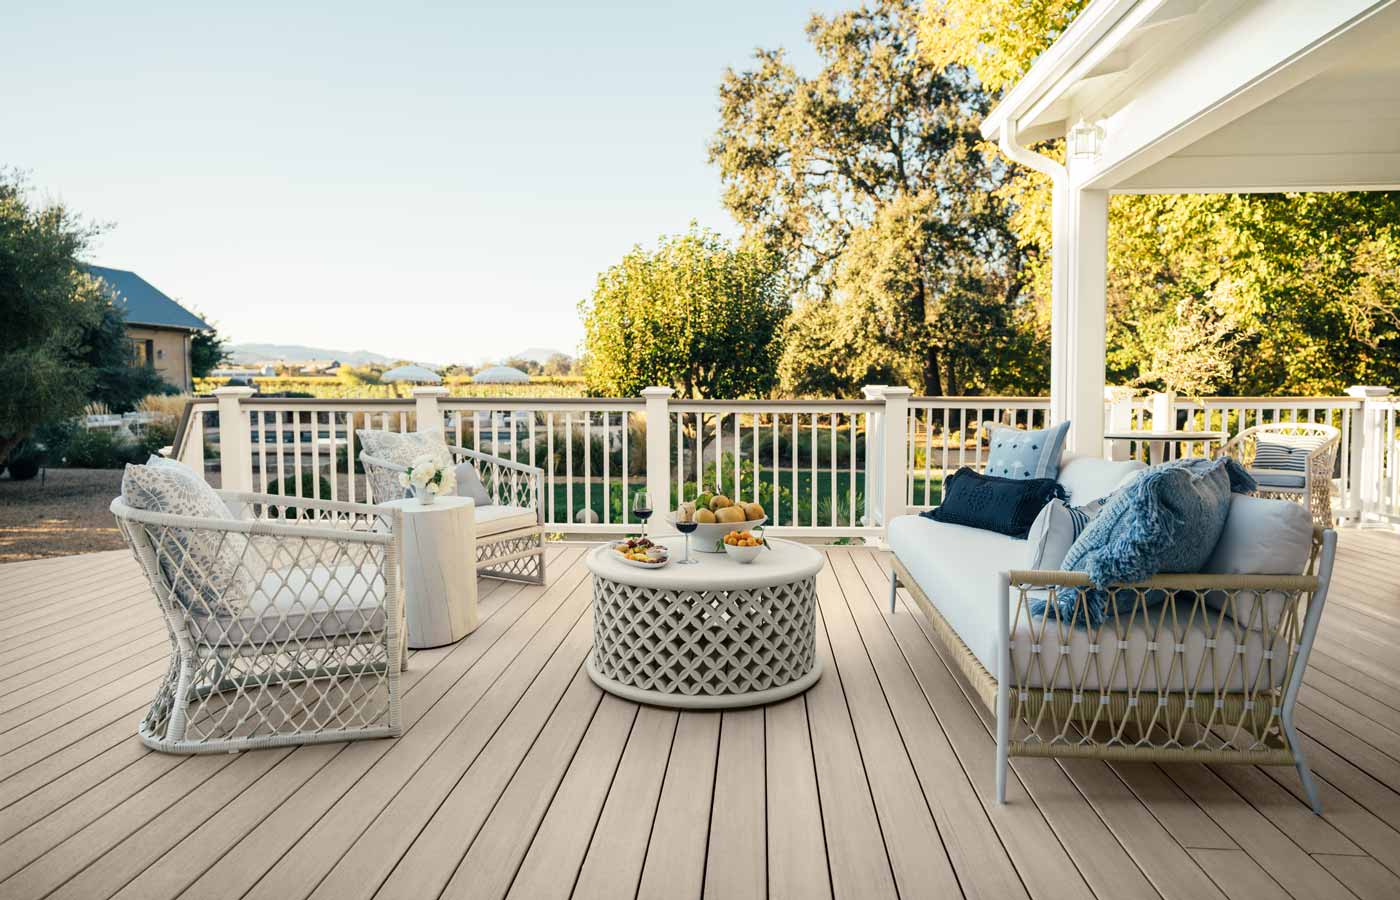 Light gray, woven patio furniture is set up in preparation to entertain guests